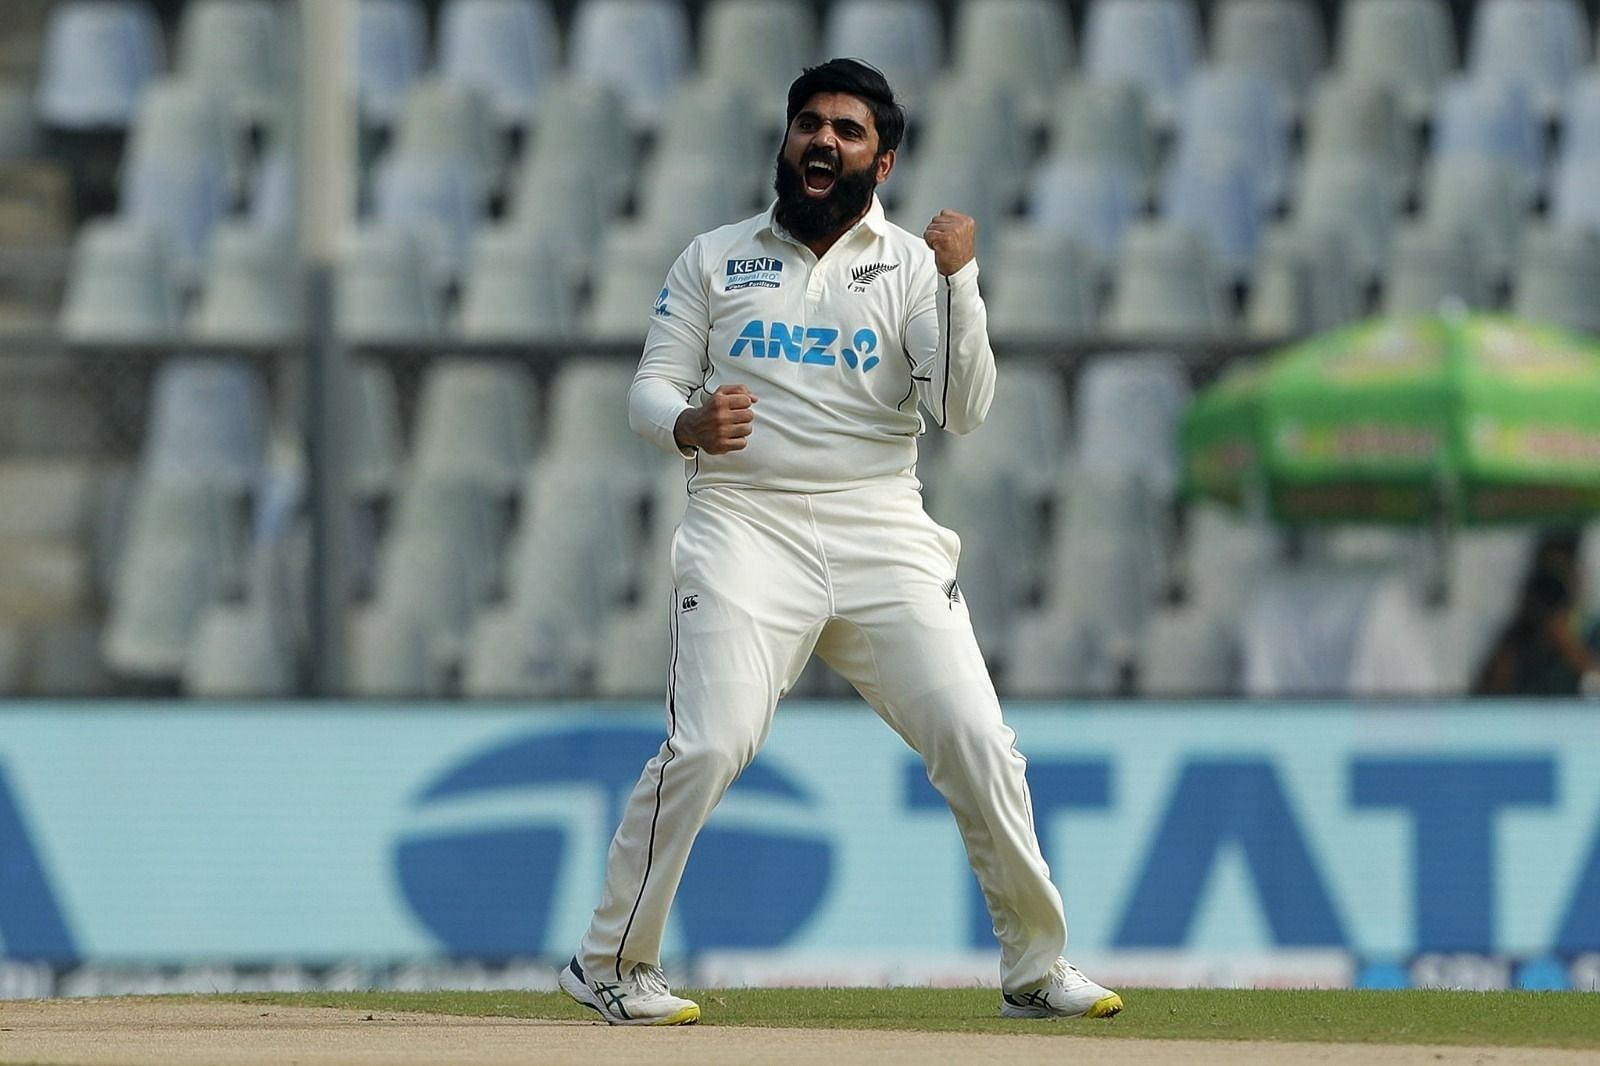  Ajaz Patel picked up 10 wickets in an innings as the rest of the bowlers struggled